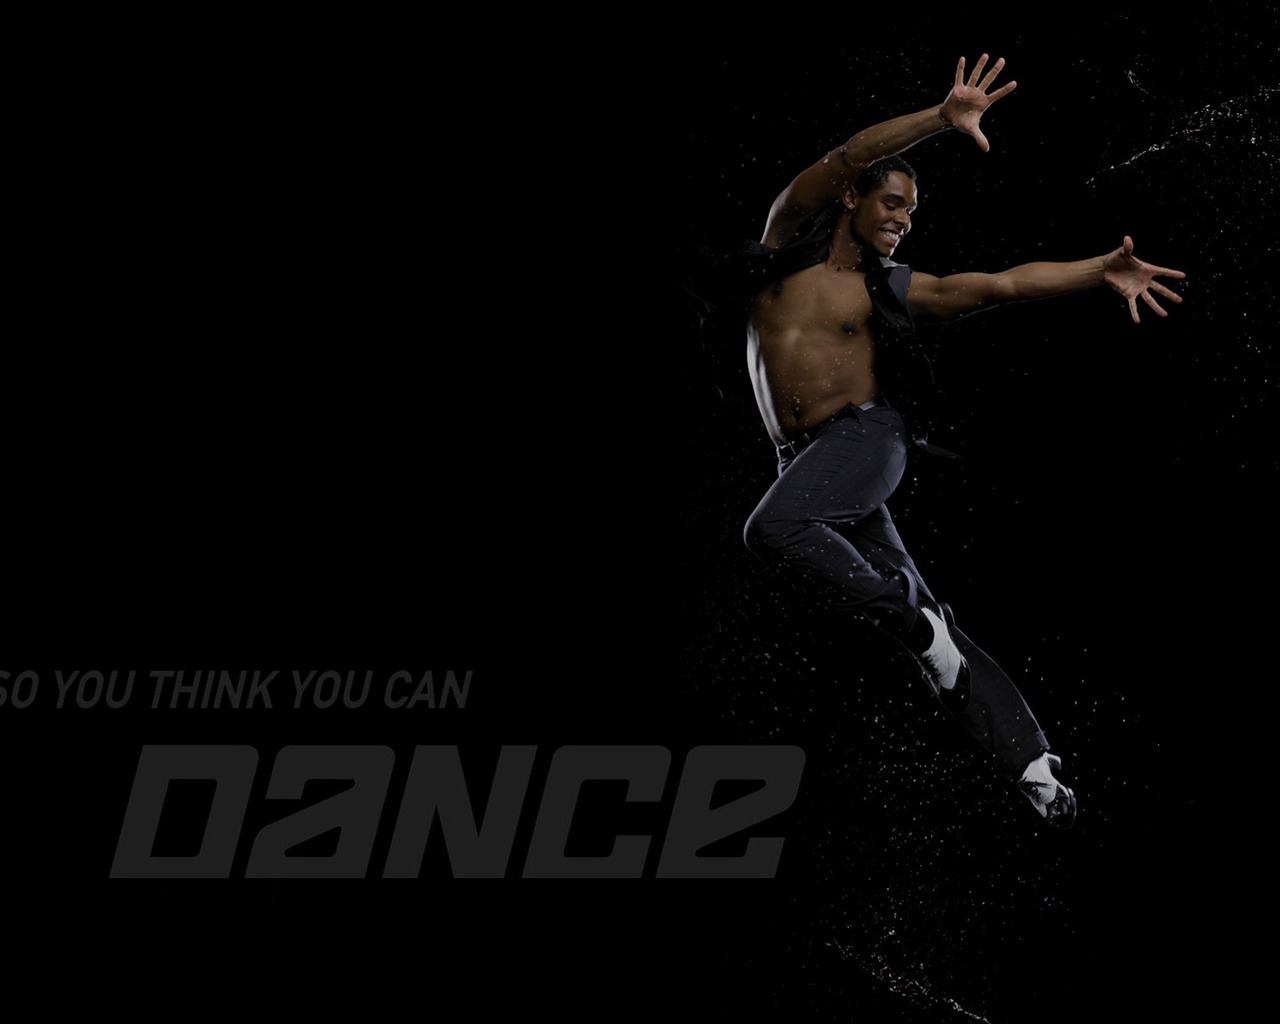 So You Think You Can Dance 舞林争霸 壁纸(二)20 - 1280x1024